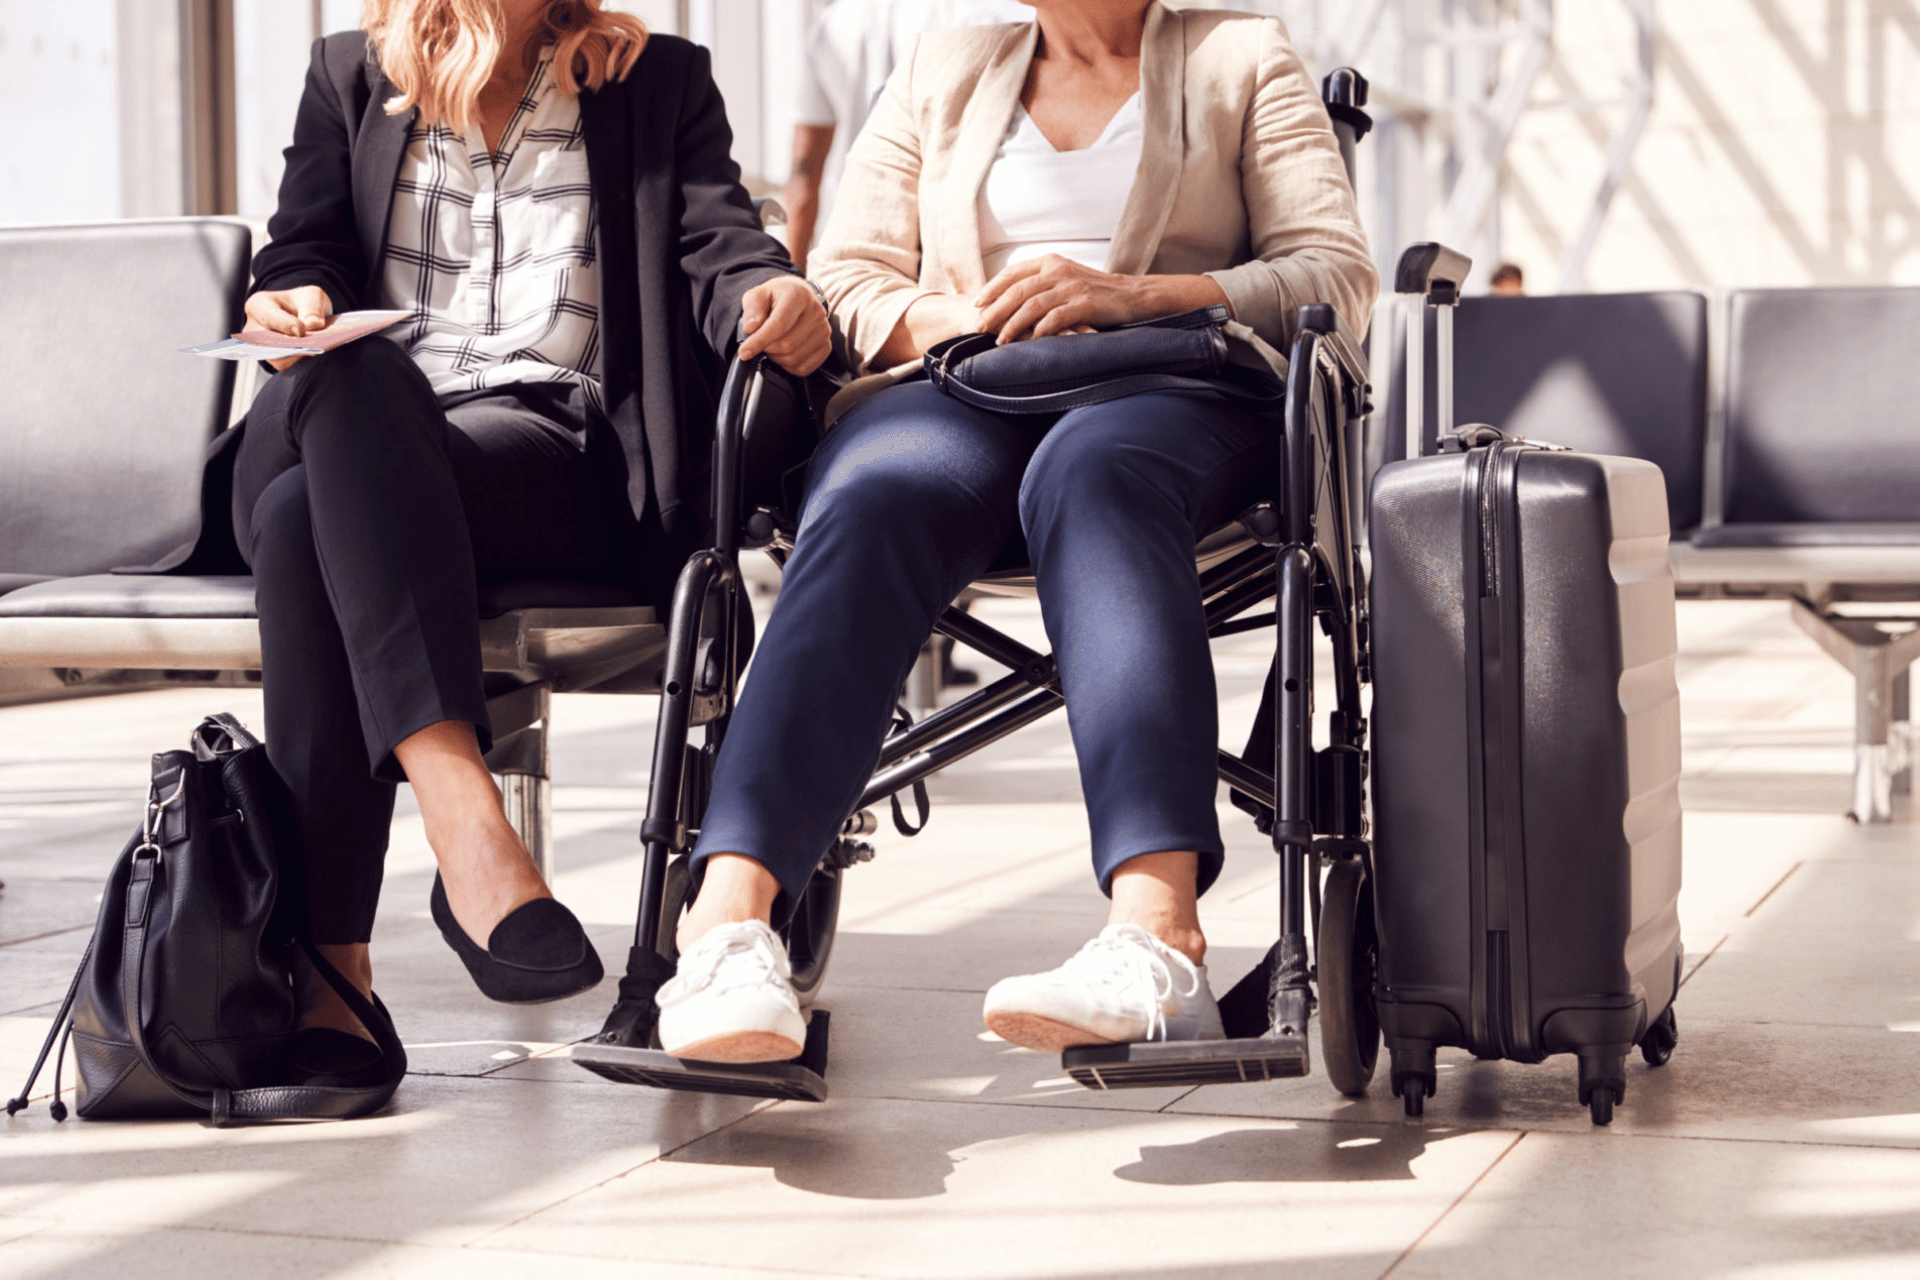 Females at an airport, one in a wheelchair